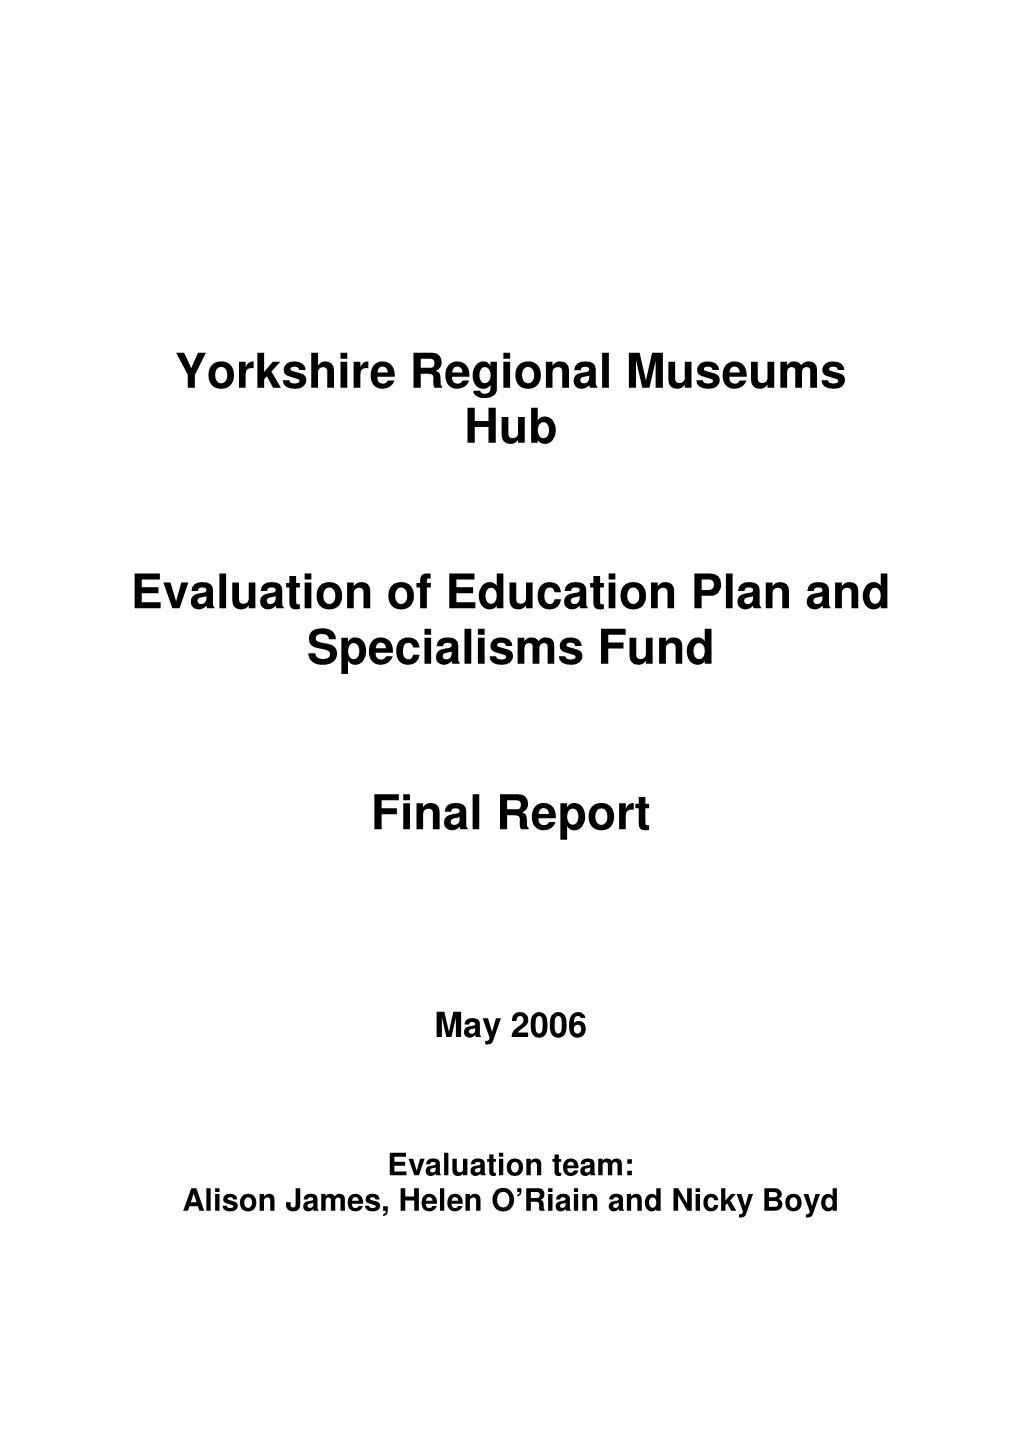 Yorkshire Regional Museums Hub Evaluation of Education Plan And